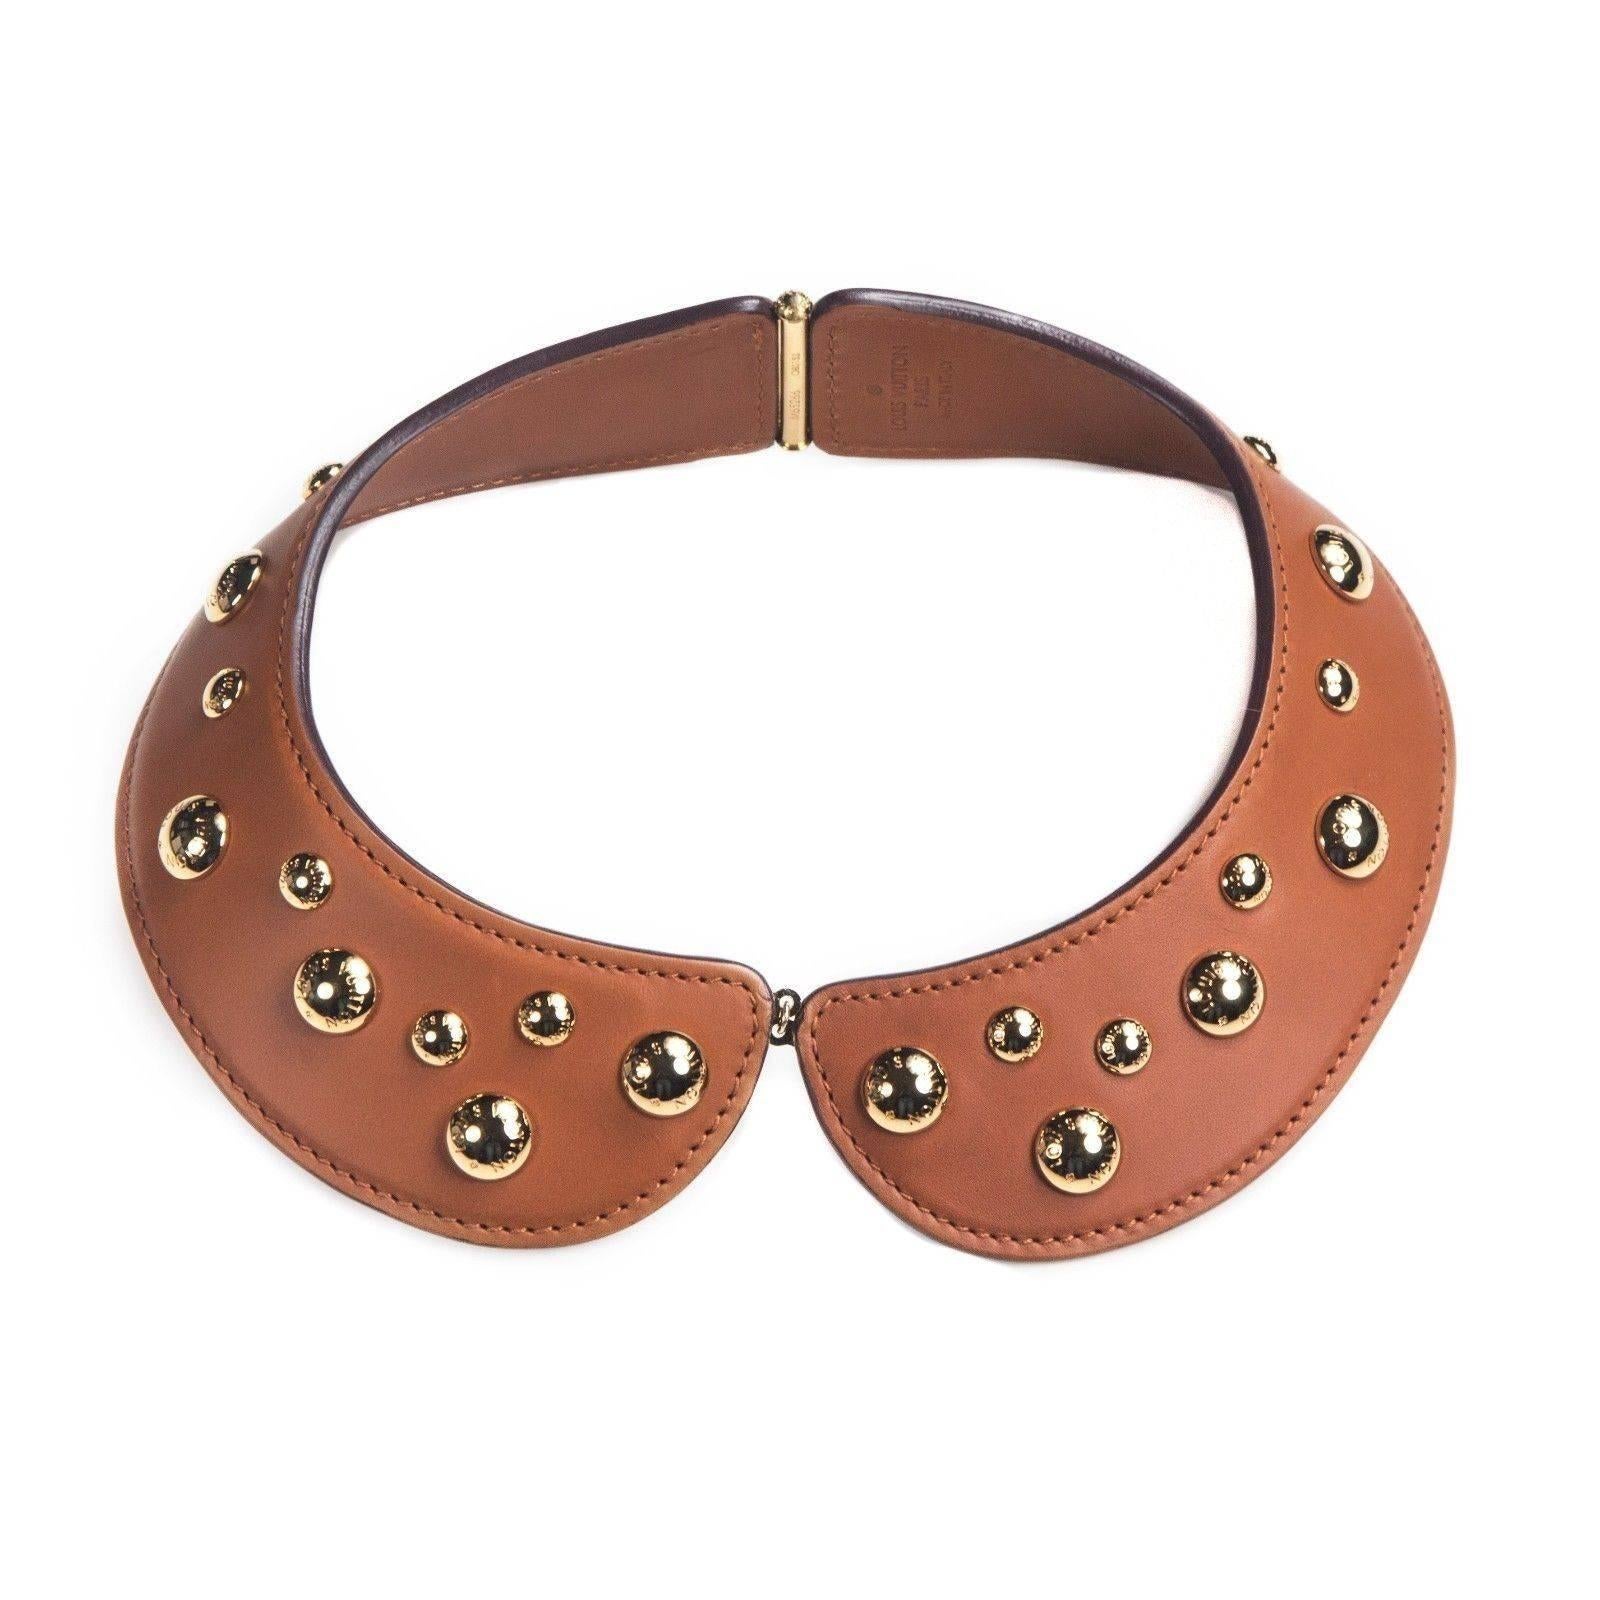 Louis Vuitton - Lock Me - Leather Studded Collar Necklace

Color: Tan / Brown

Material: Leather

------------------------------------------------------------

Details:

- gold tone hardware

- round studs throughout

- peter pan collar shape

- peg